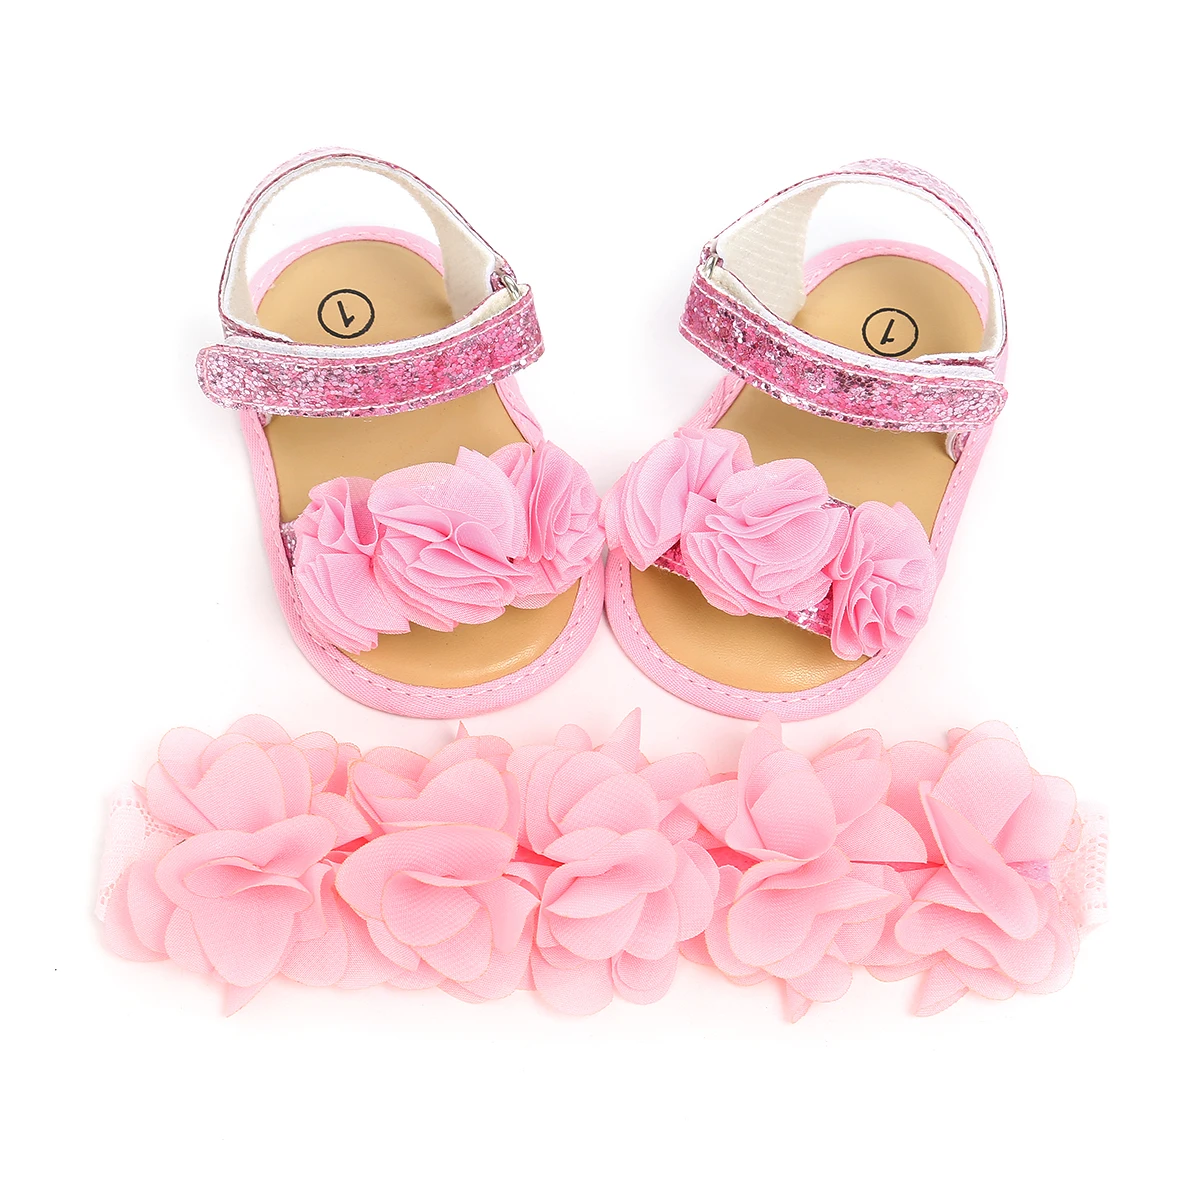 Breathable PU Leather Baby Sandals For Comfortable Summer Adventures Baby Shoes